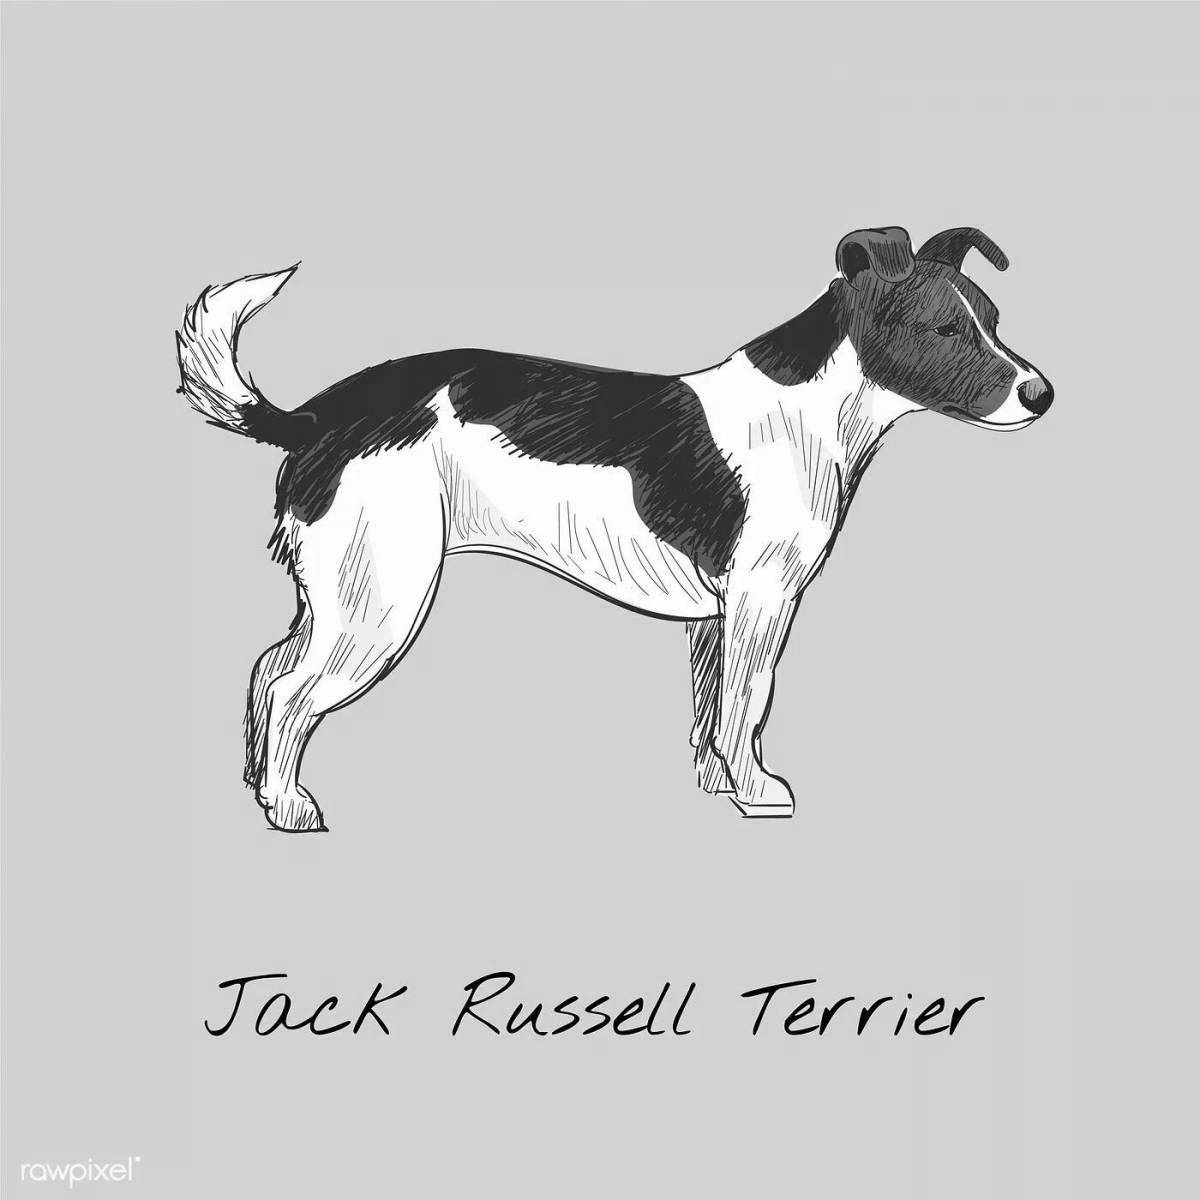 Jack Russell Terrier dog live coloring